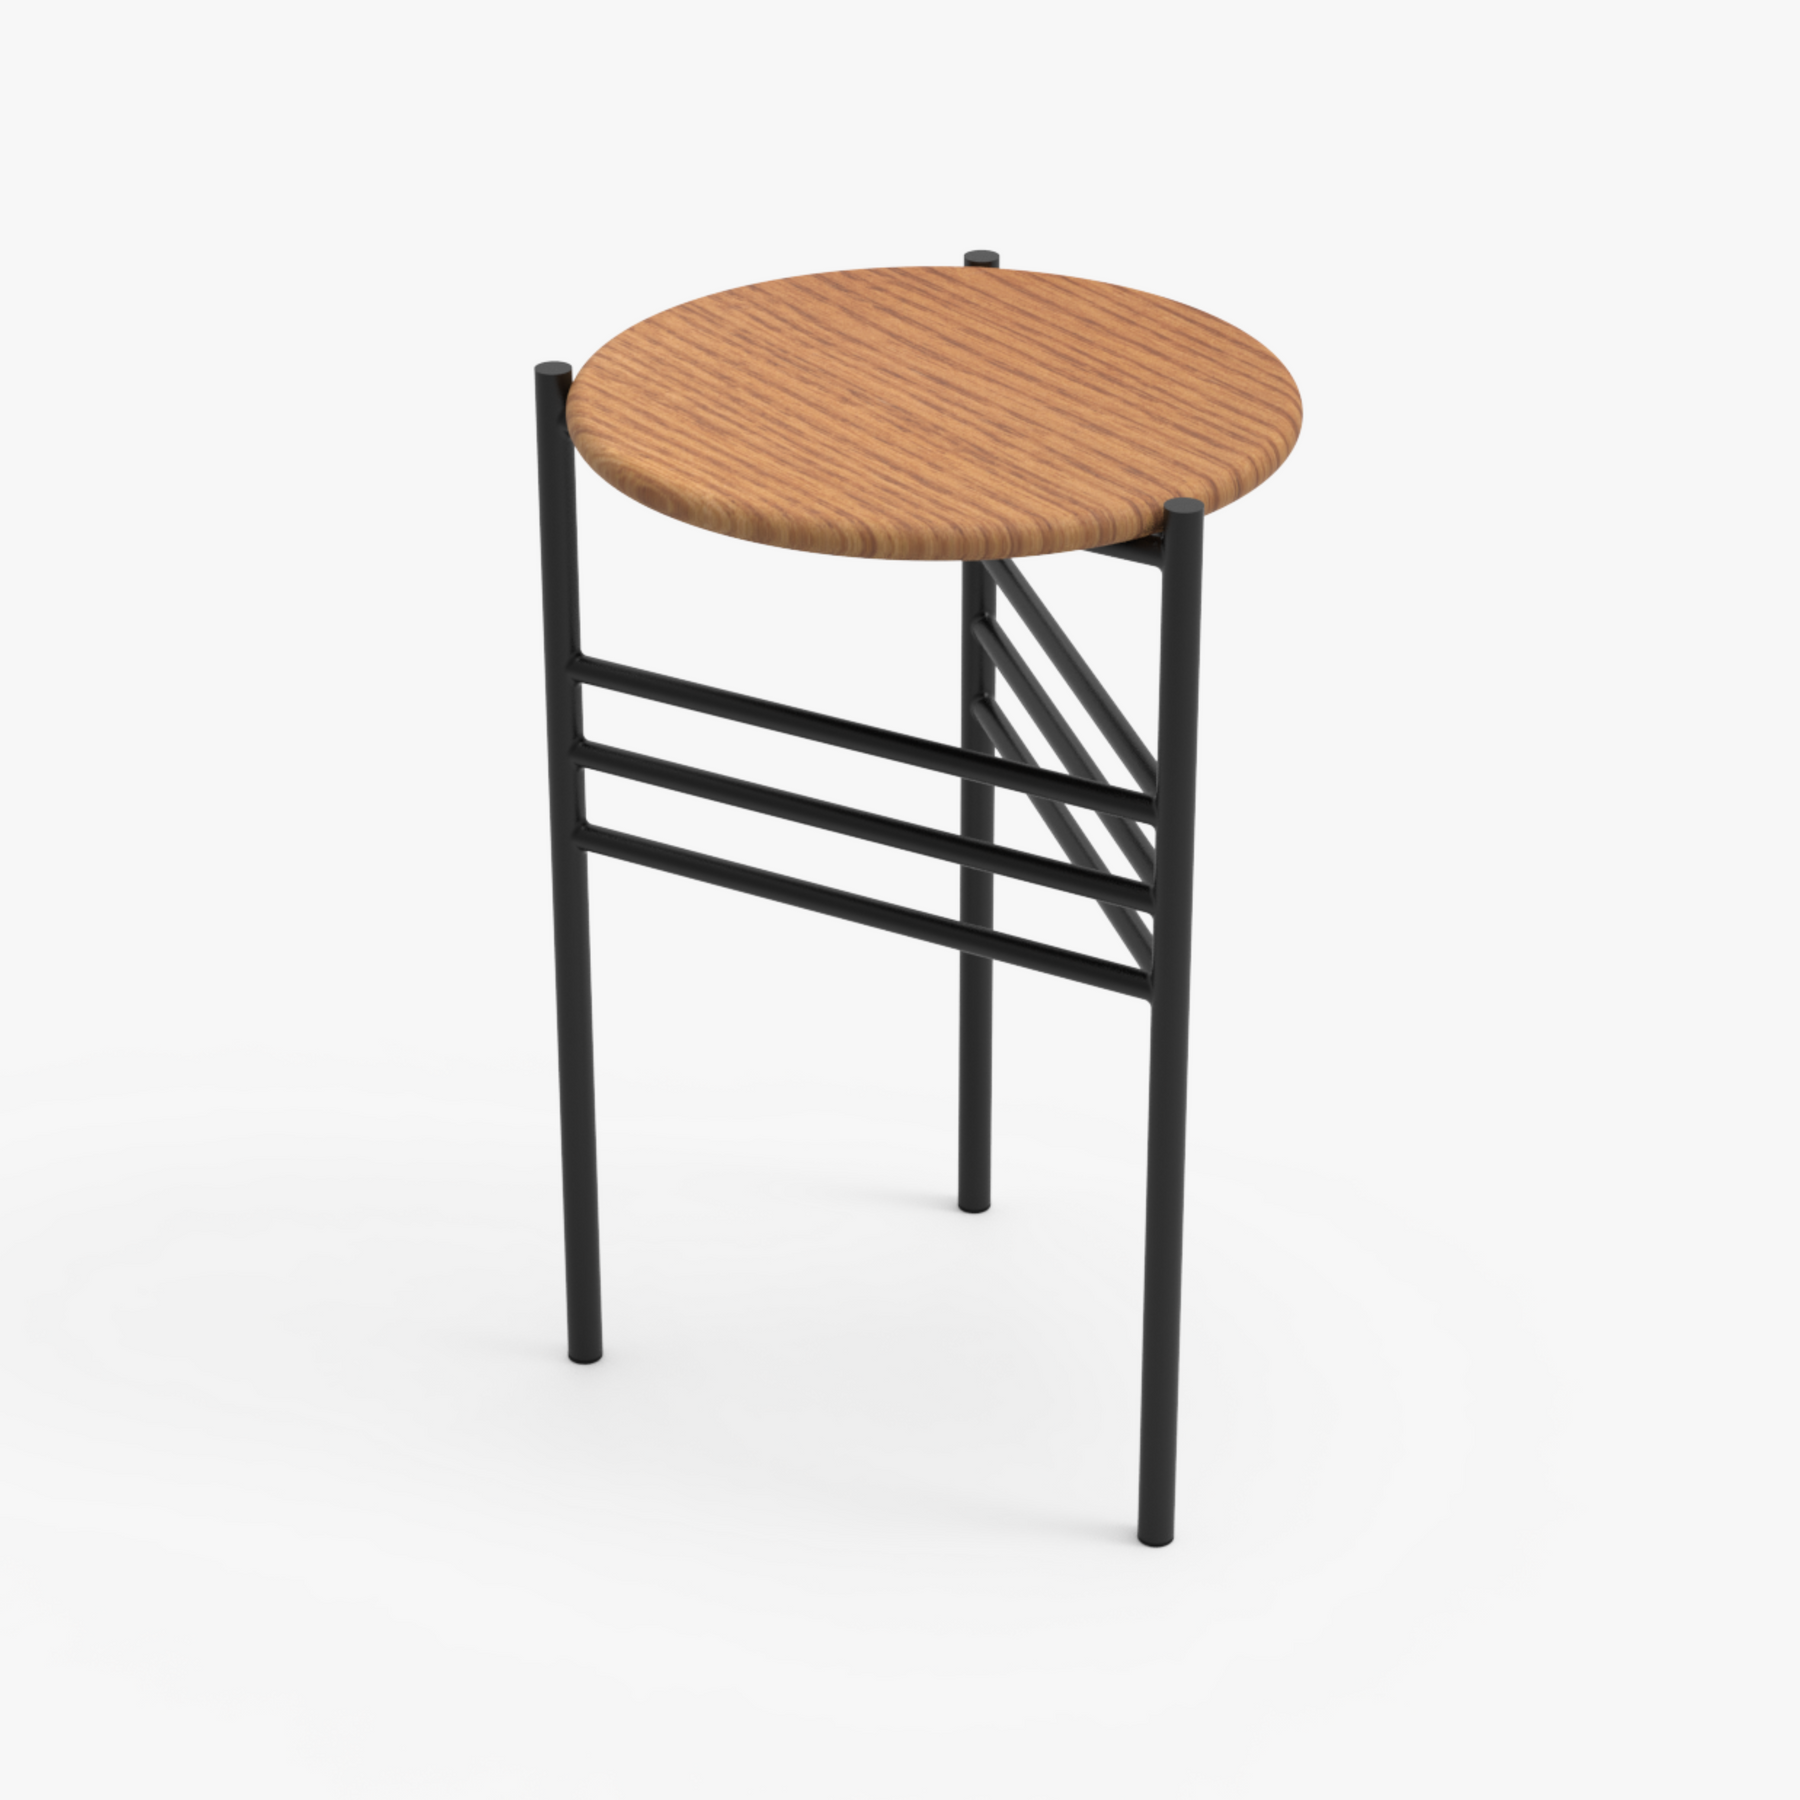 Tri Side Table